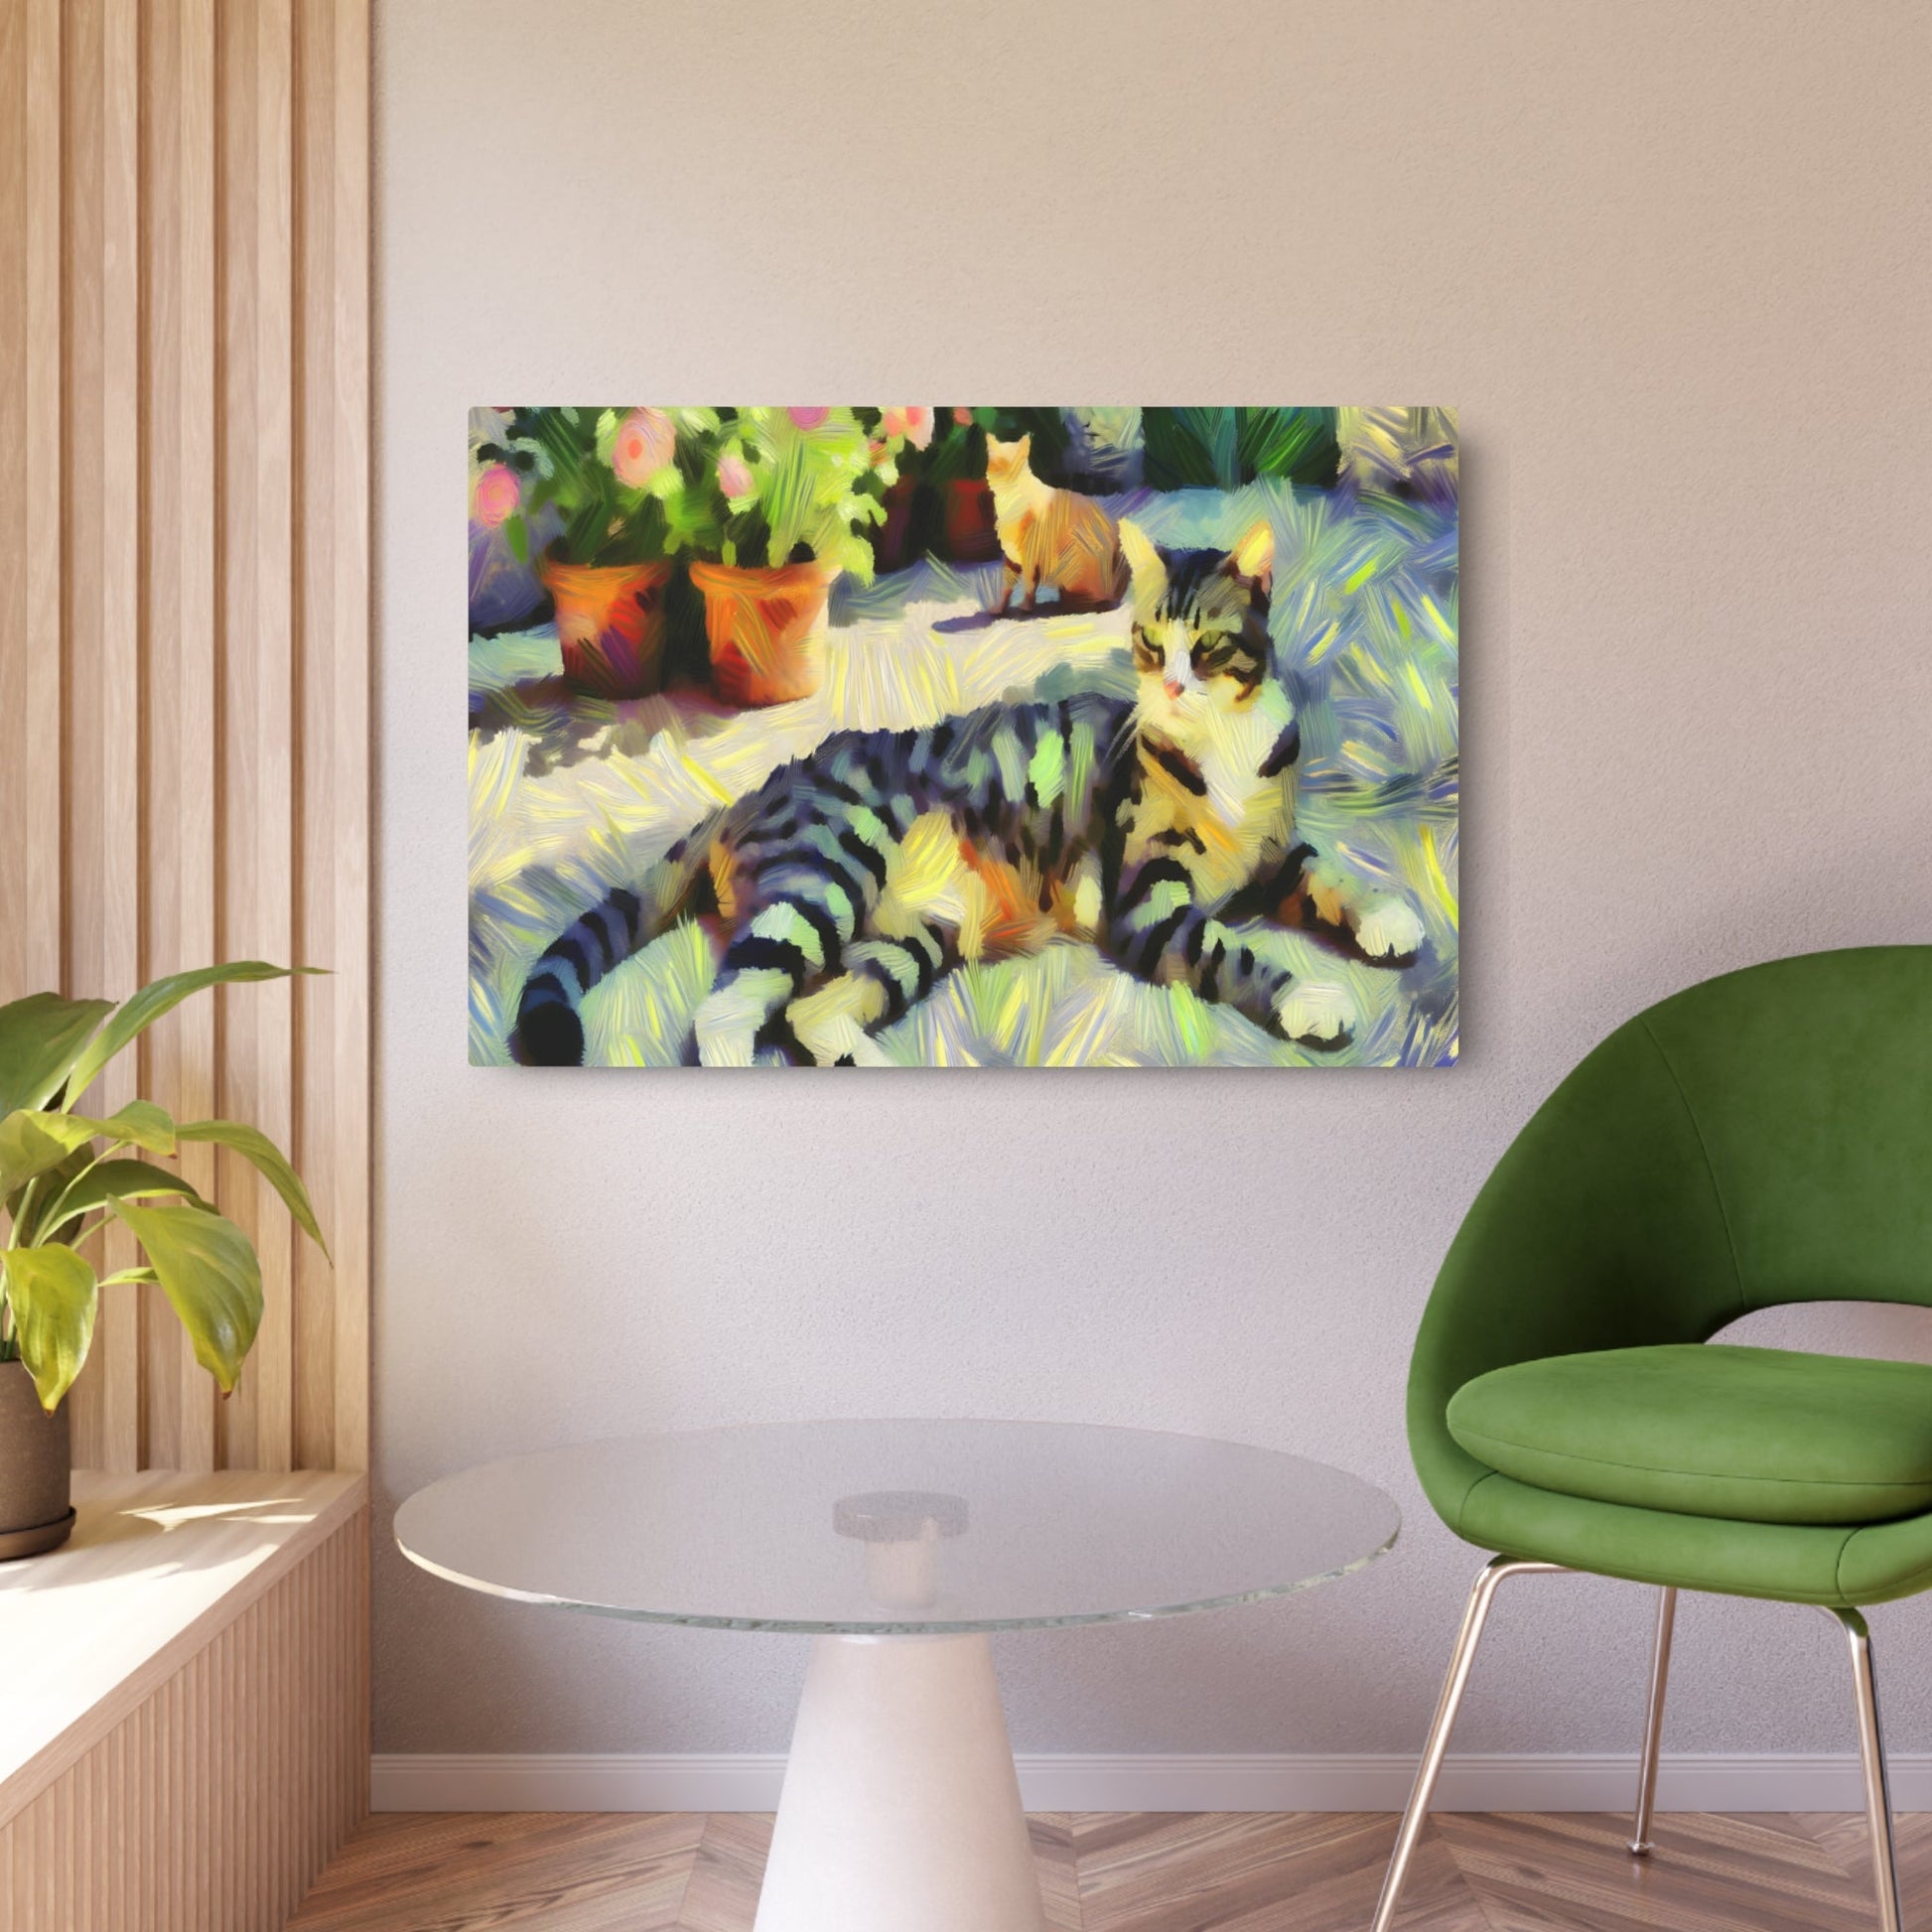 Metal Poster Art | "Impressionistic Western Art Styles - Beautifully Rendered Cat in Impressionism" - Metal Poster Art 36″ x 24″ (Horizontal) 0.12''